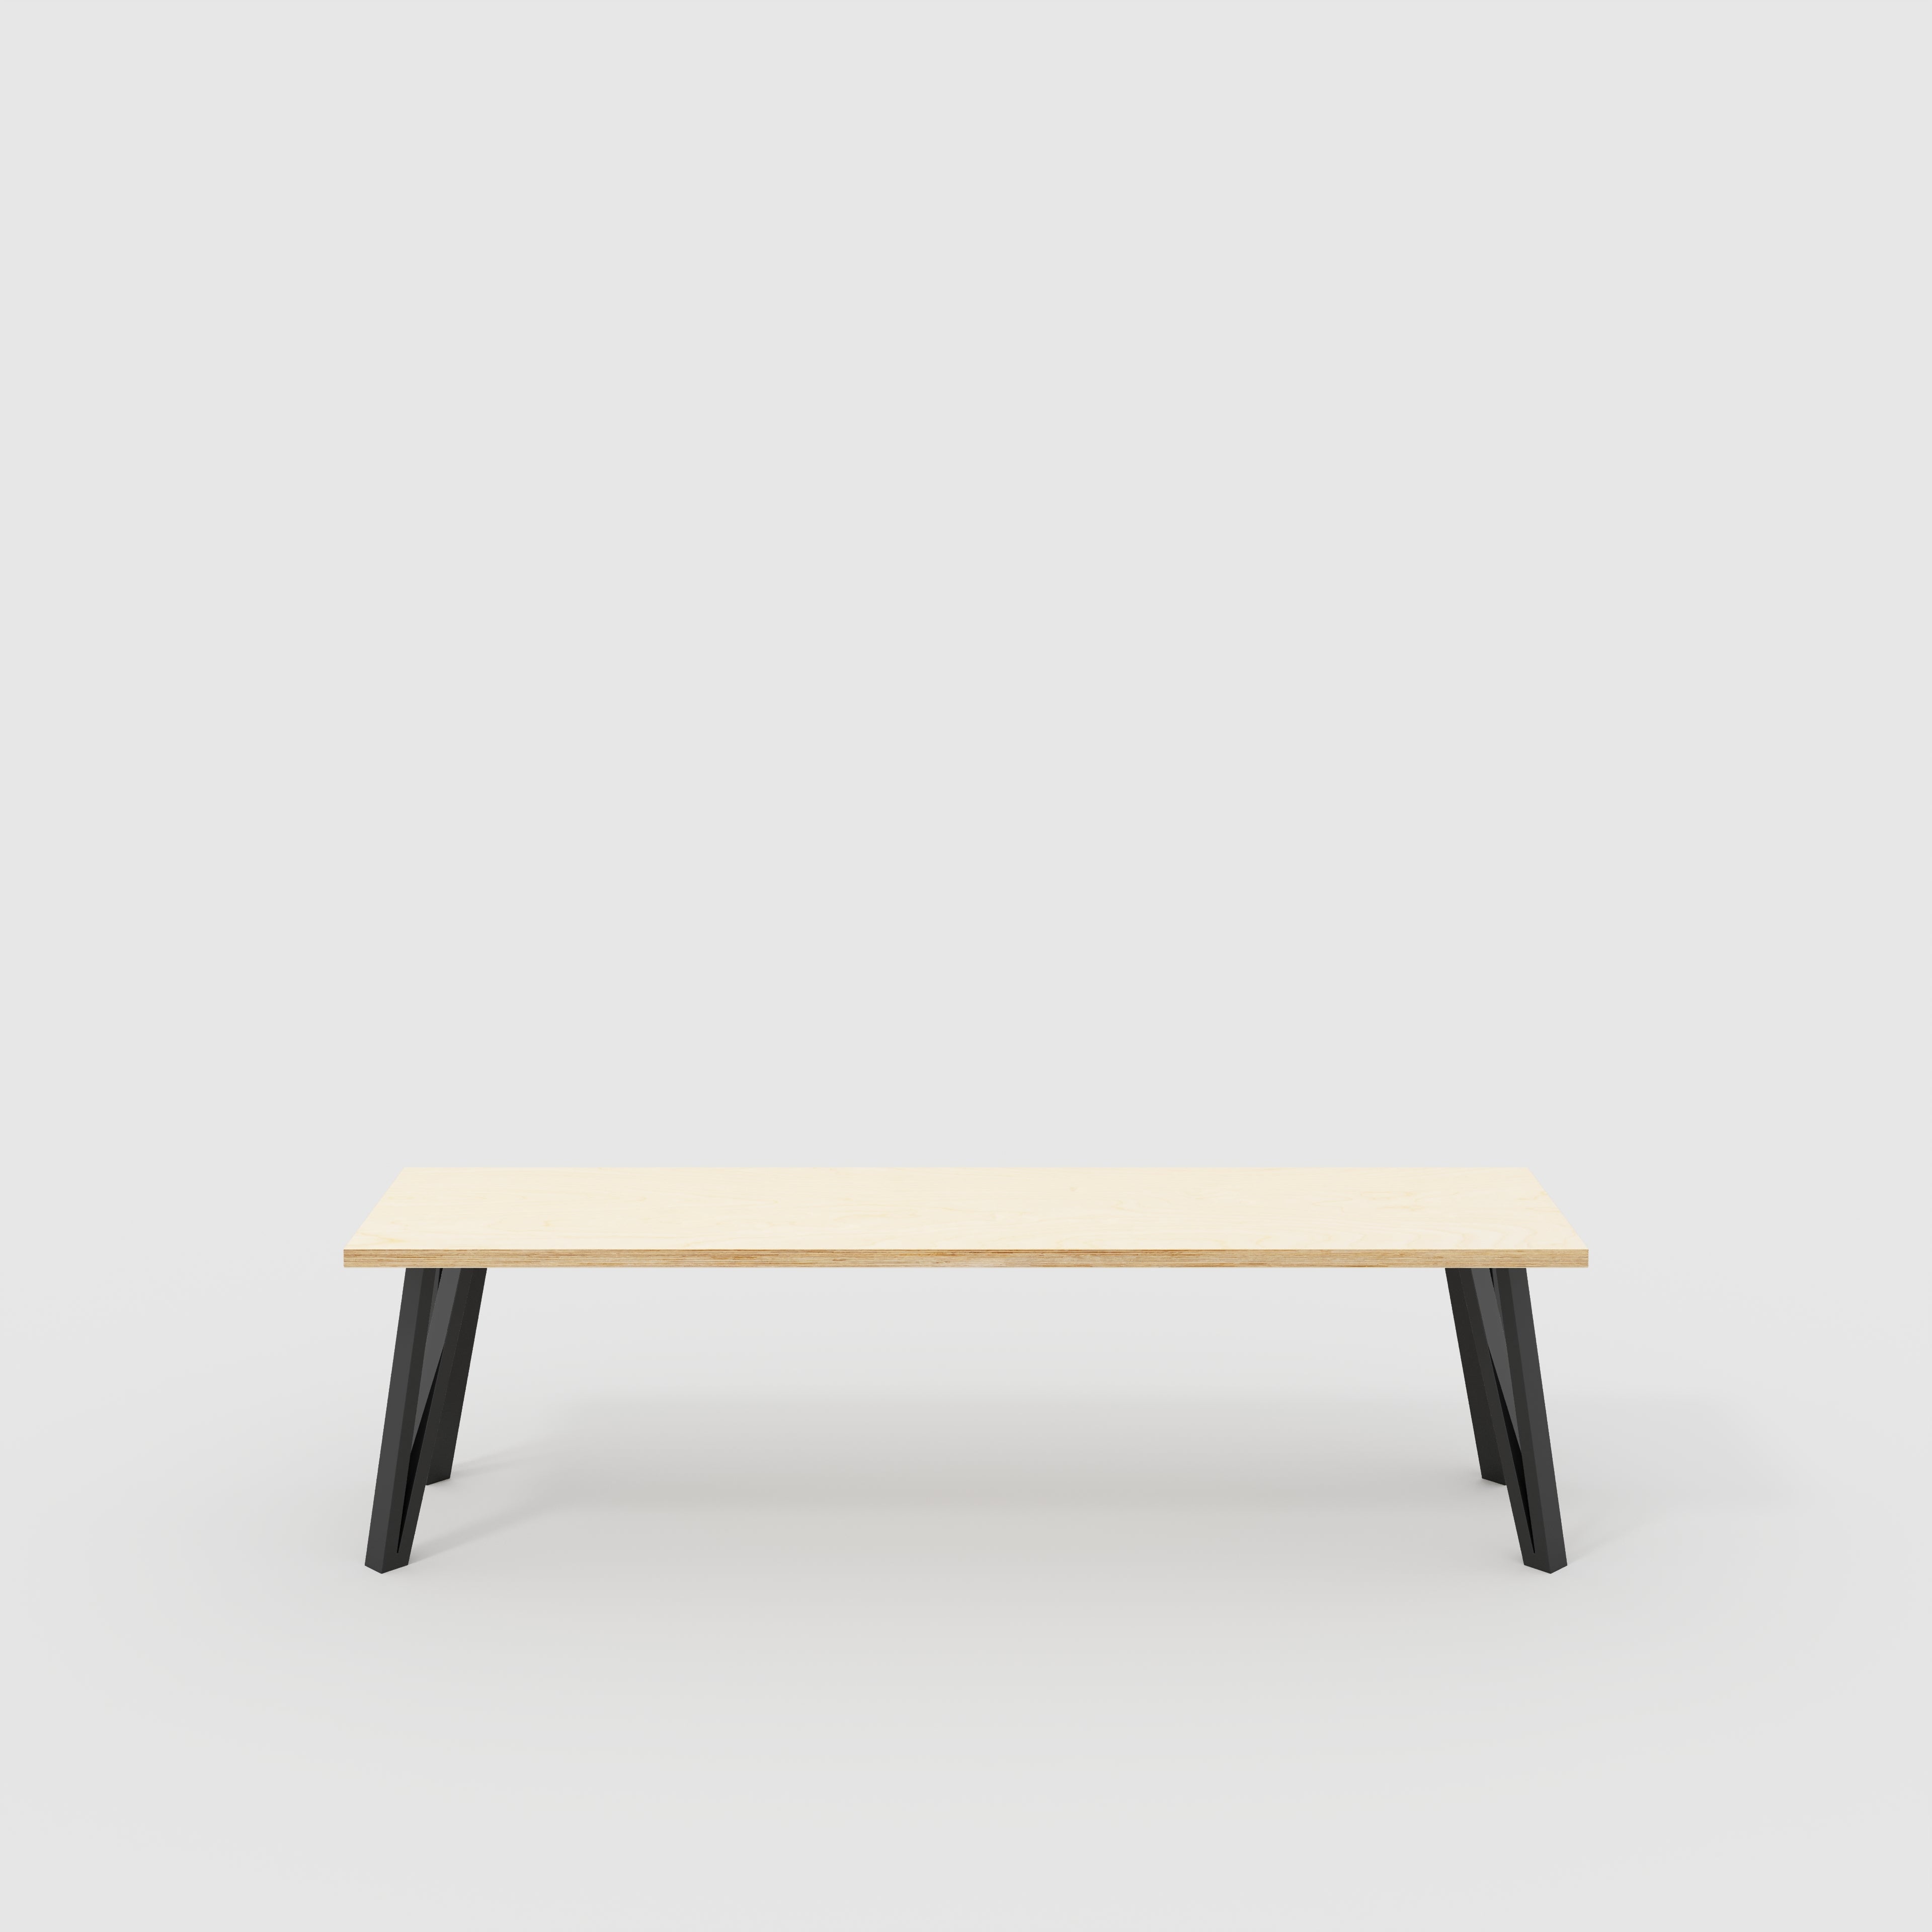 Bench Seat with Black Box Hairpin Legs - Plywood Birch - 1600(w) x 400(d) x 450(h)